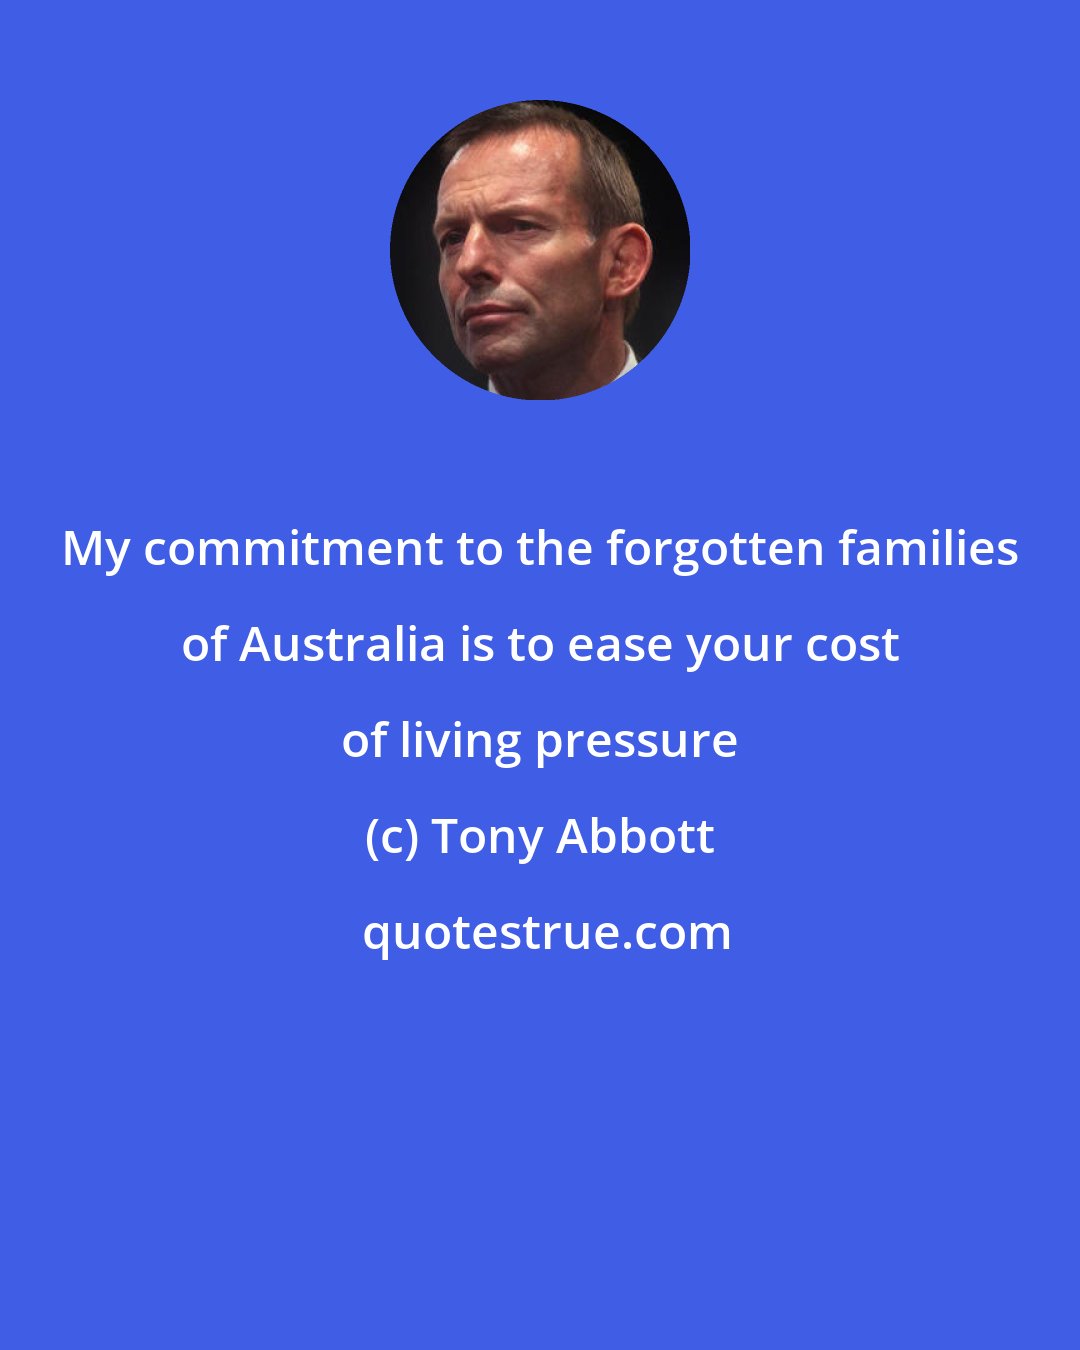 Tony Abbott: My commitment to the forgotten families of Australia is to ease your cost of living pressure